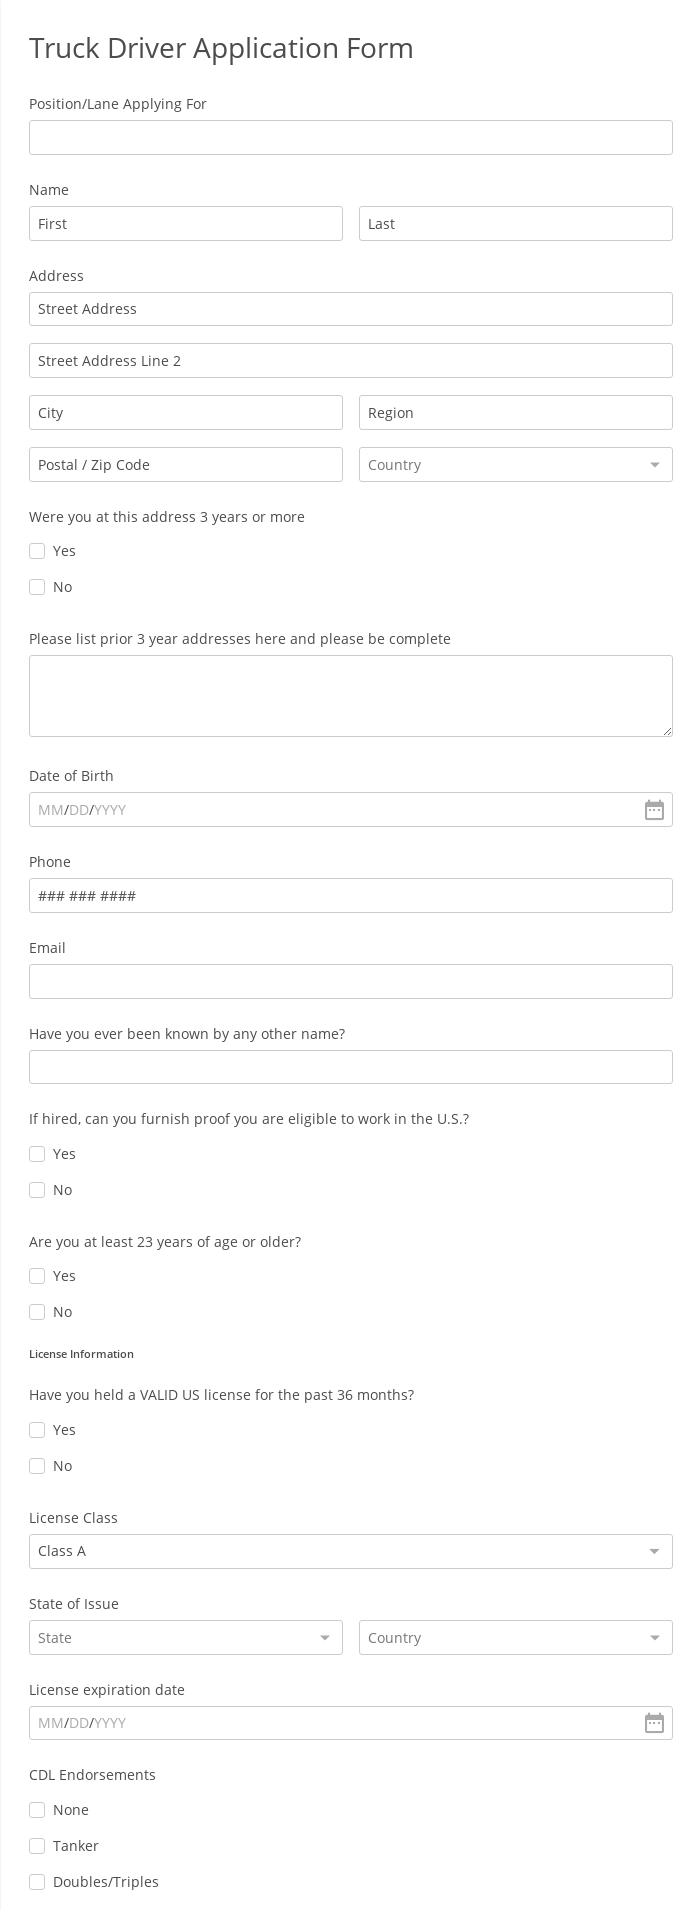 Truck Driver Application Form